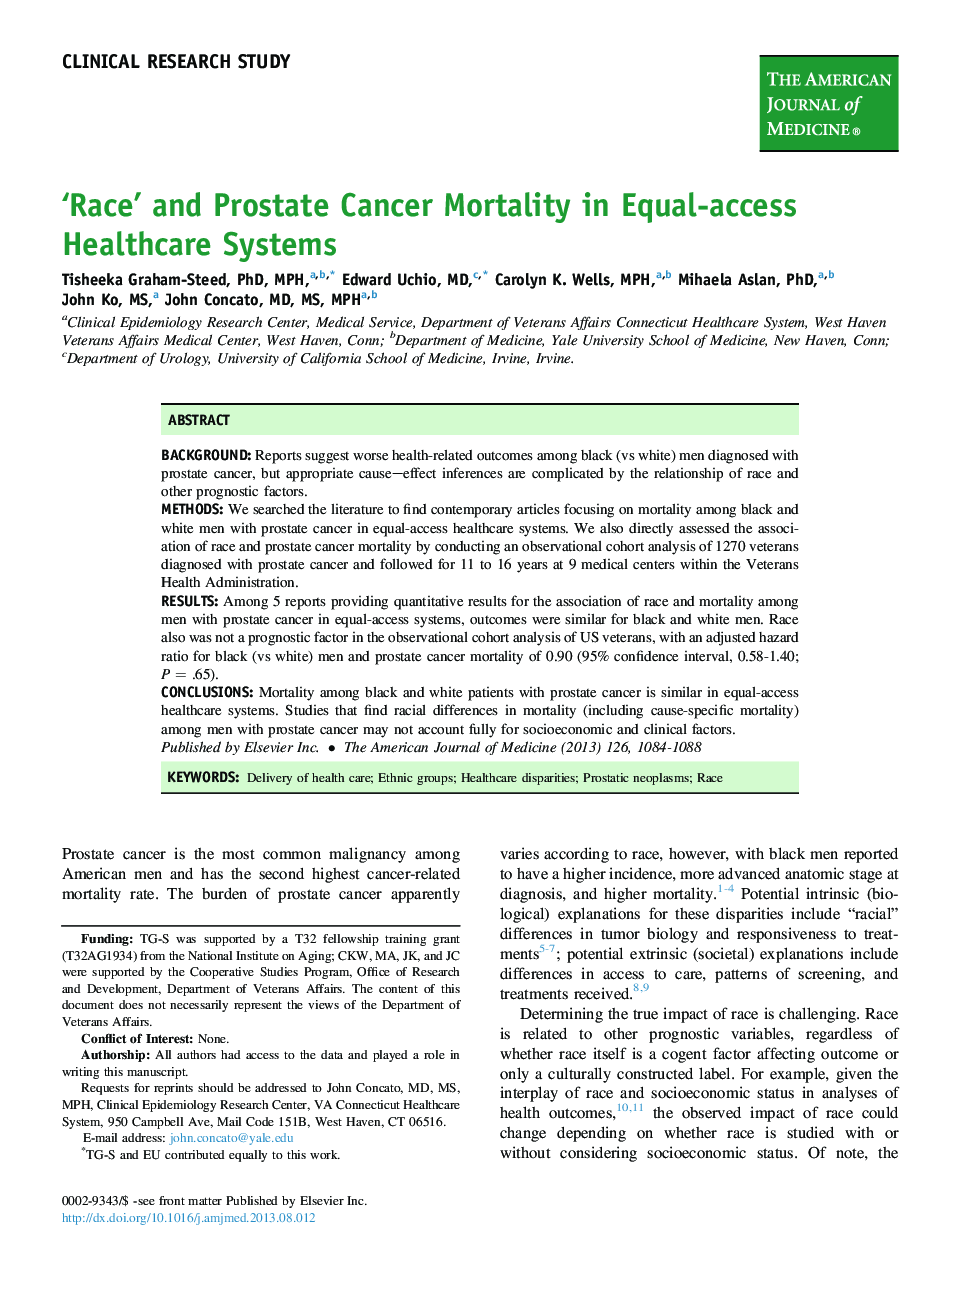 ‘Race’ and Prostate Cancer Mortality in Equal-access Healthcare Systems 